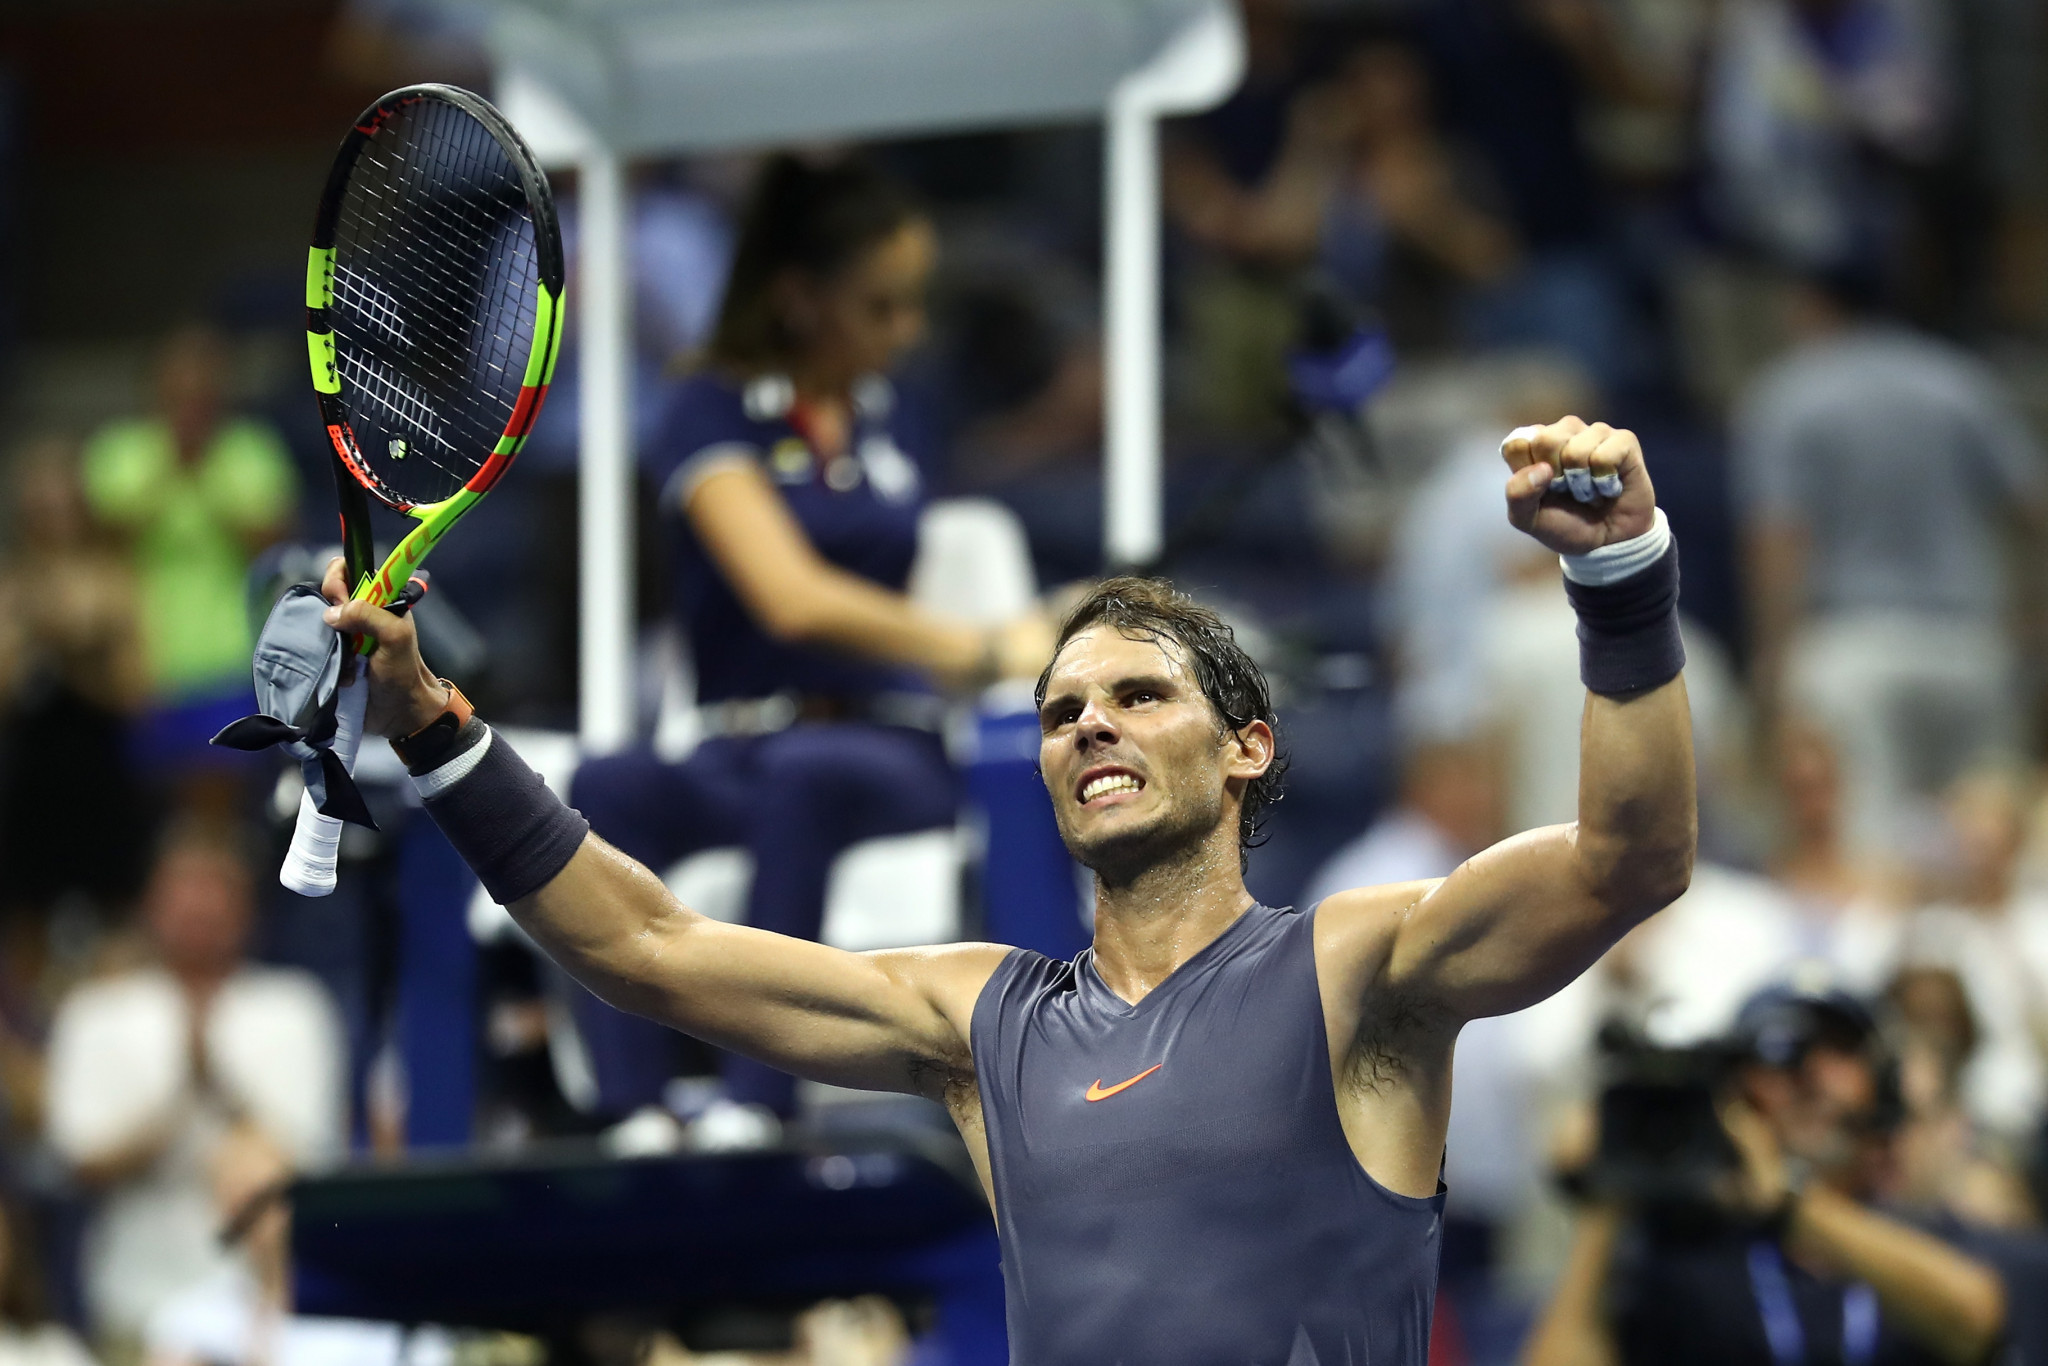 Nadal cruises into next round as Serena Williams sets up meeting with sister Venus at US Open